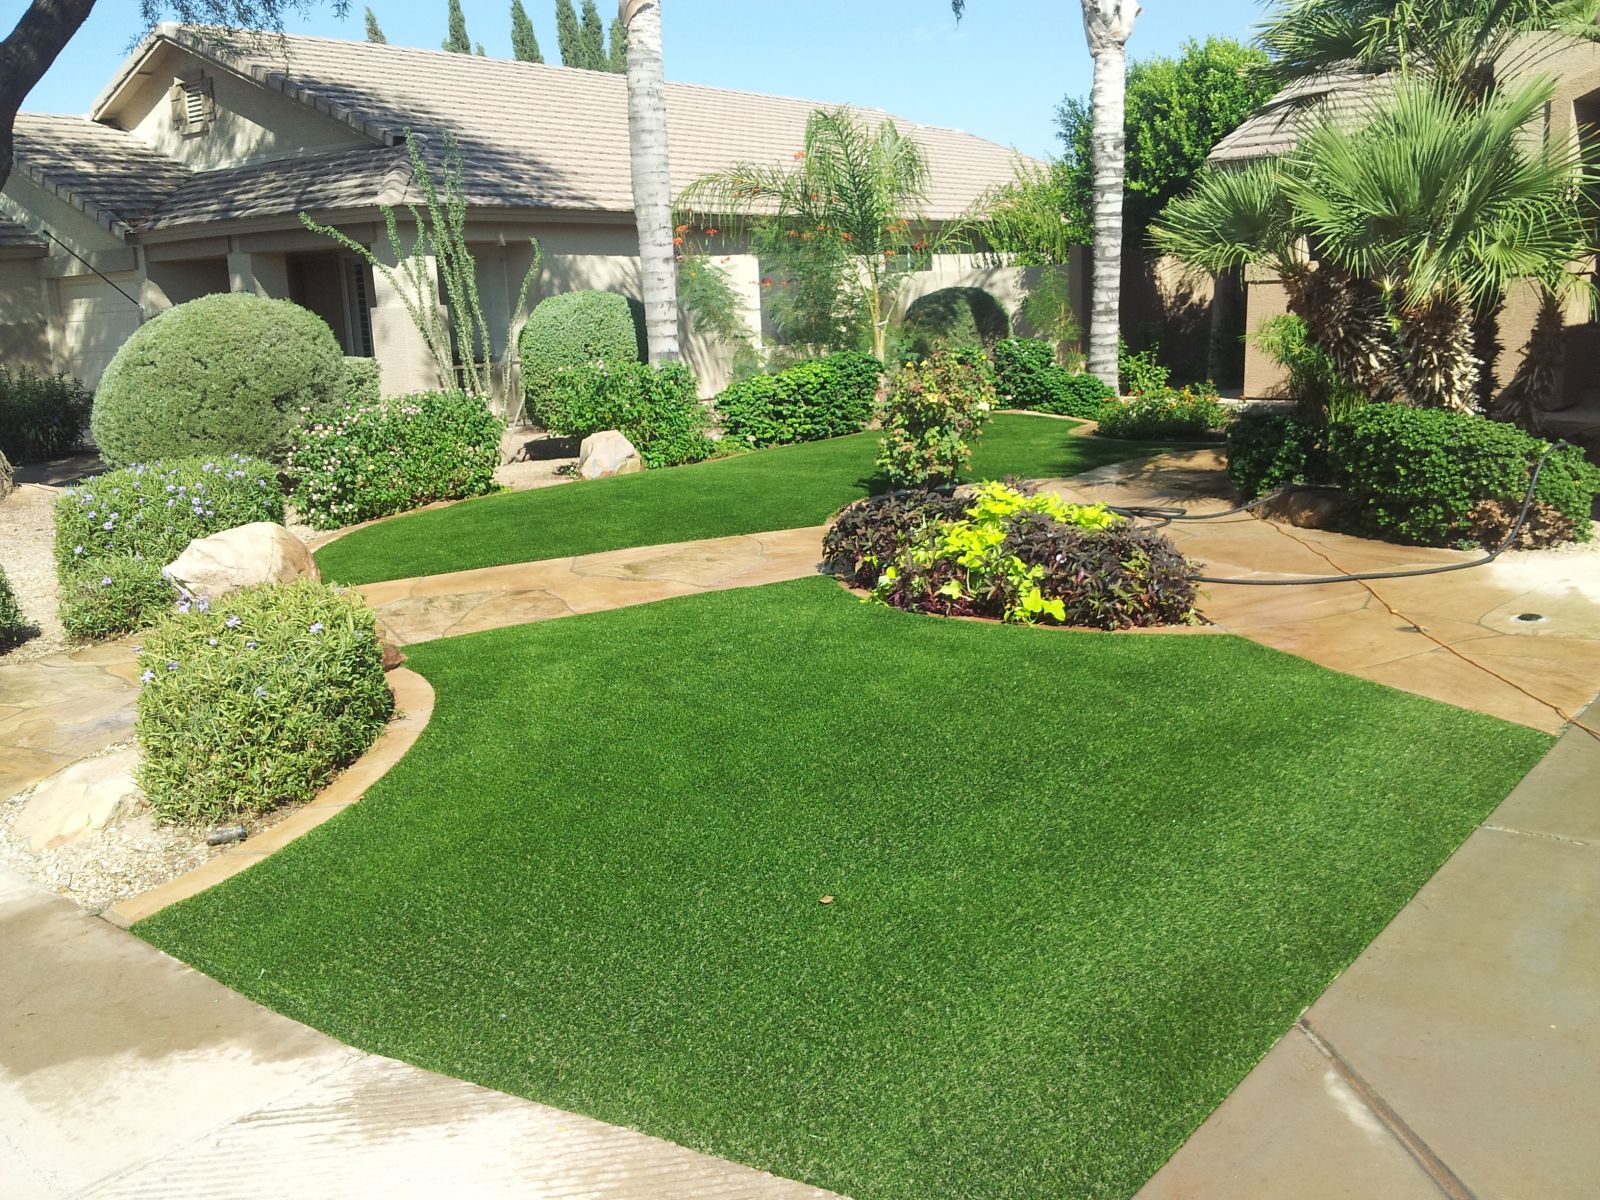 Why Use Artificial Turf For Golf? Paradise Valley Fake Grass